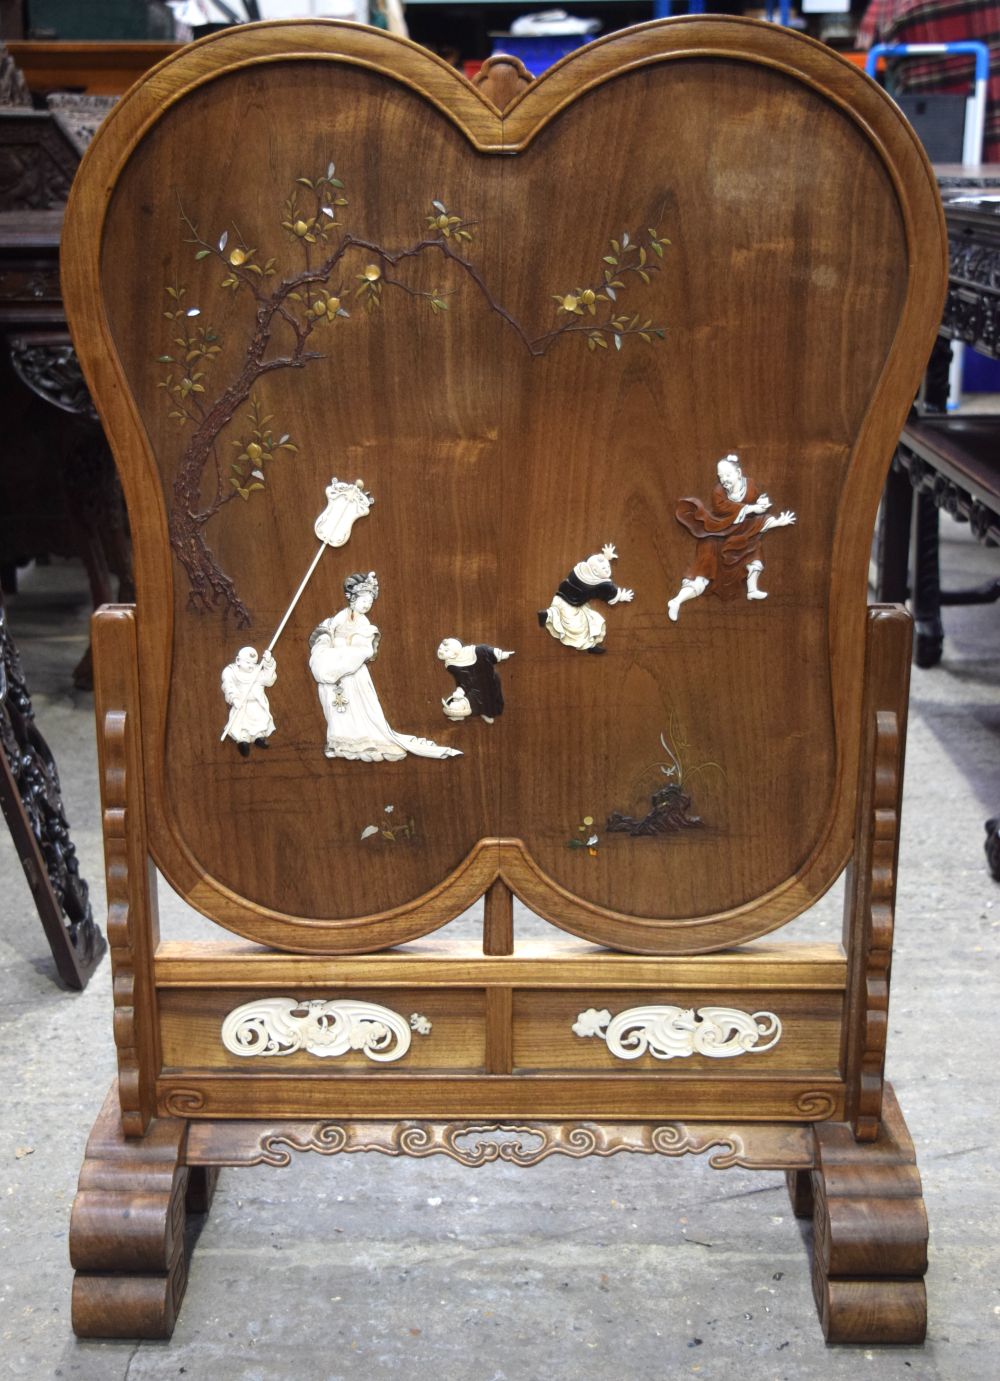 A LOVELY LARGE 19TH CENTURY JAPANESE MEIJI PERIOD SHIBAYAMA IVORY INLAID SCREEN ON STAND decorated w